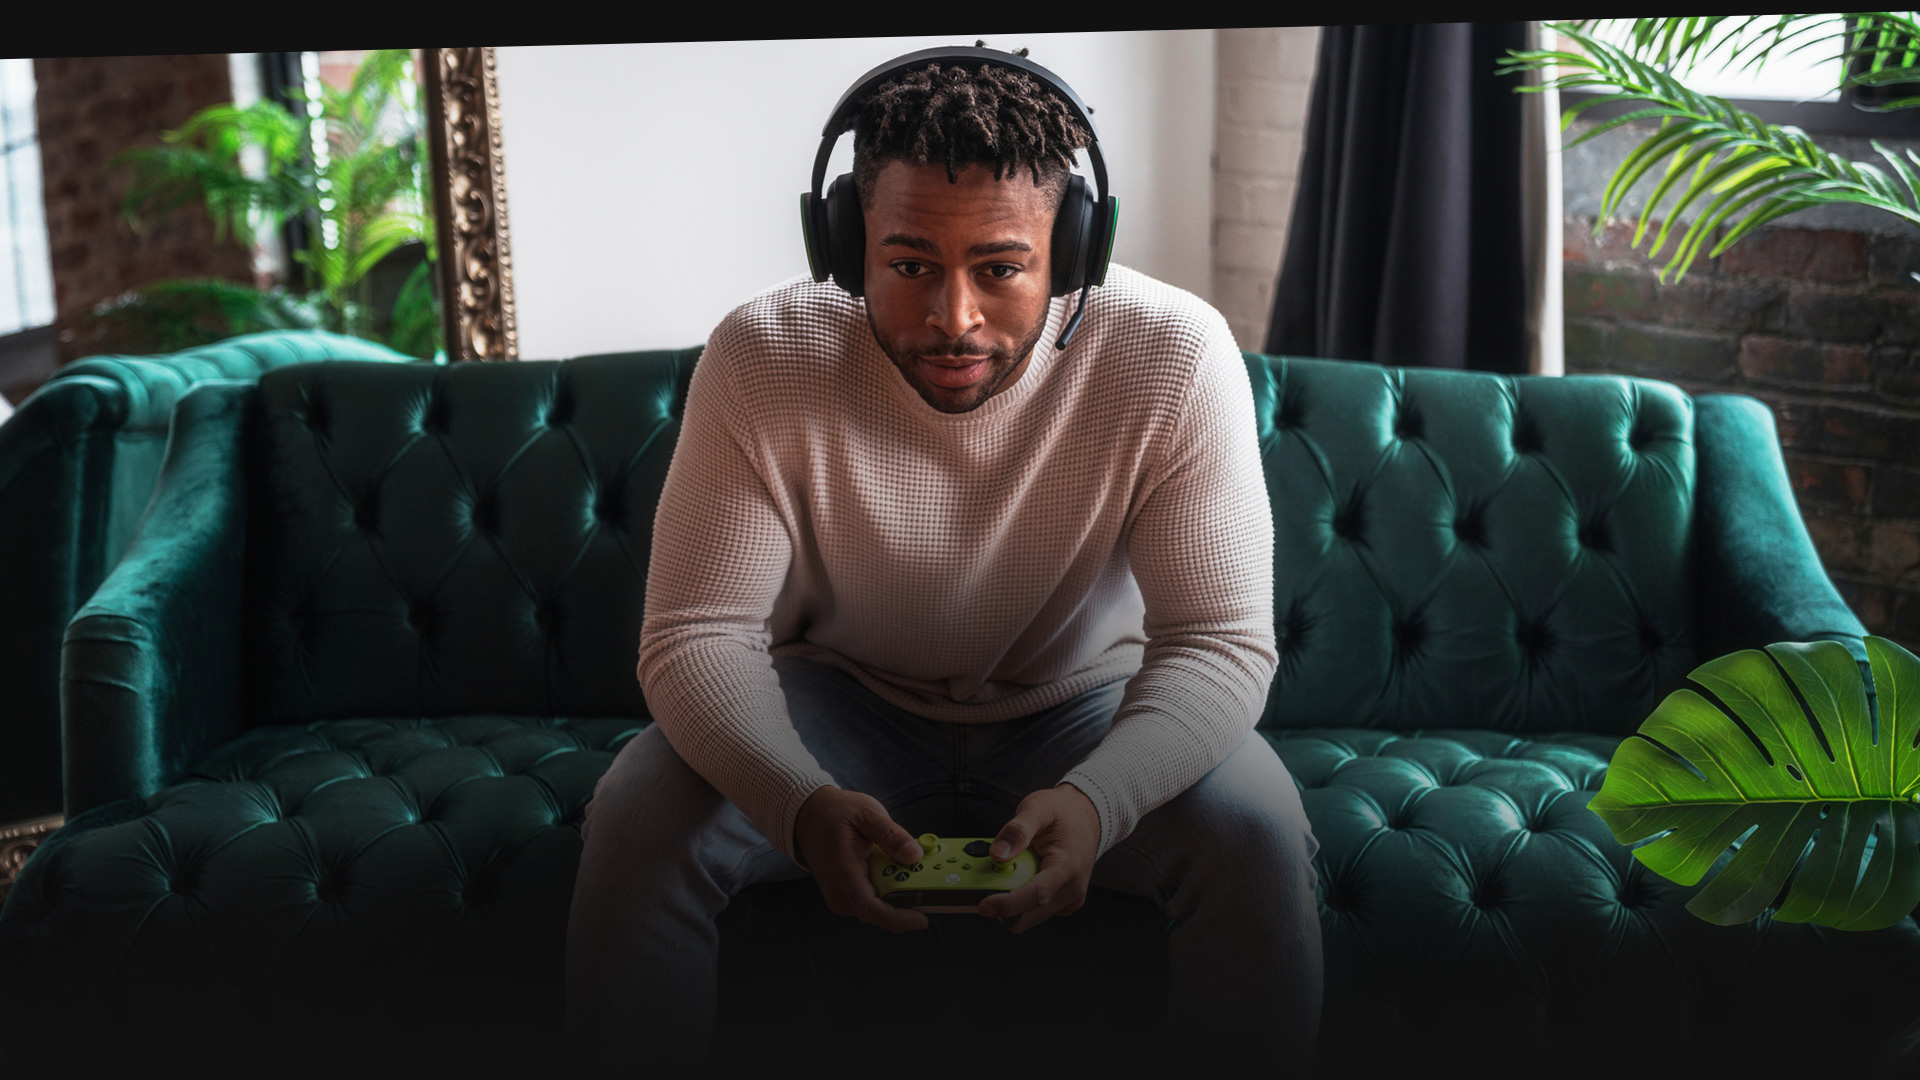 One person wearing a headset playing Xbox on a couch